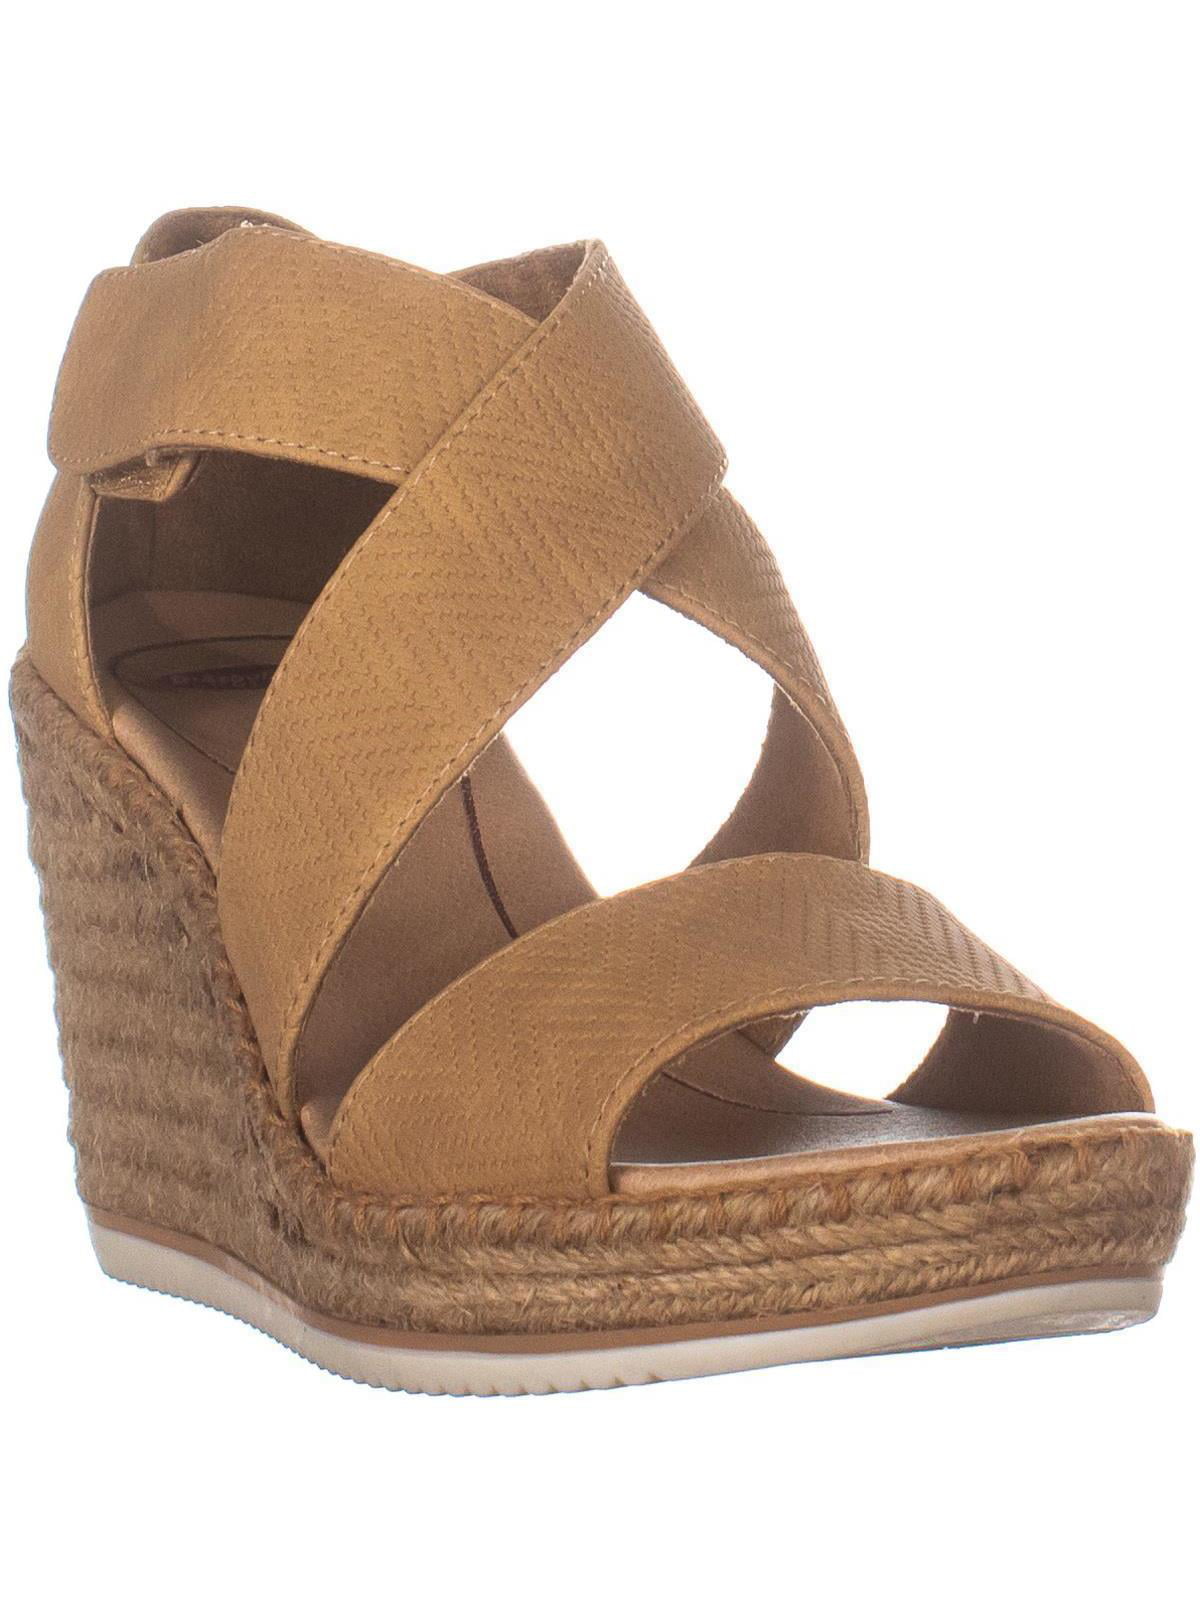 Vacay Espadrille Wedge Sandals, Nude 